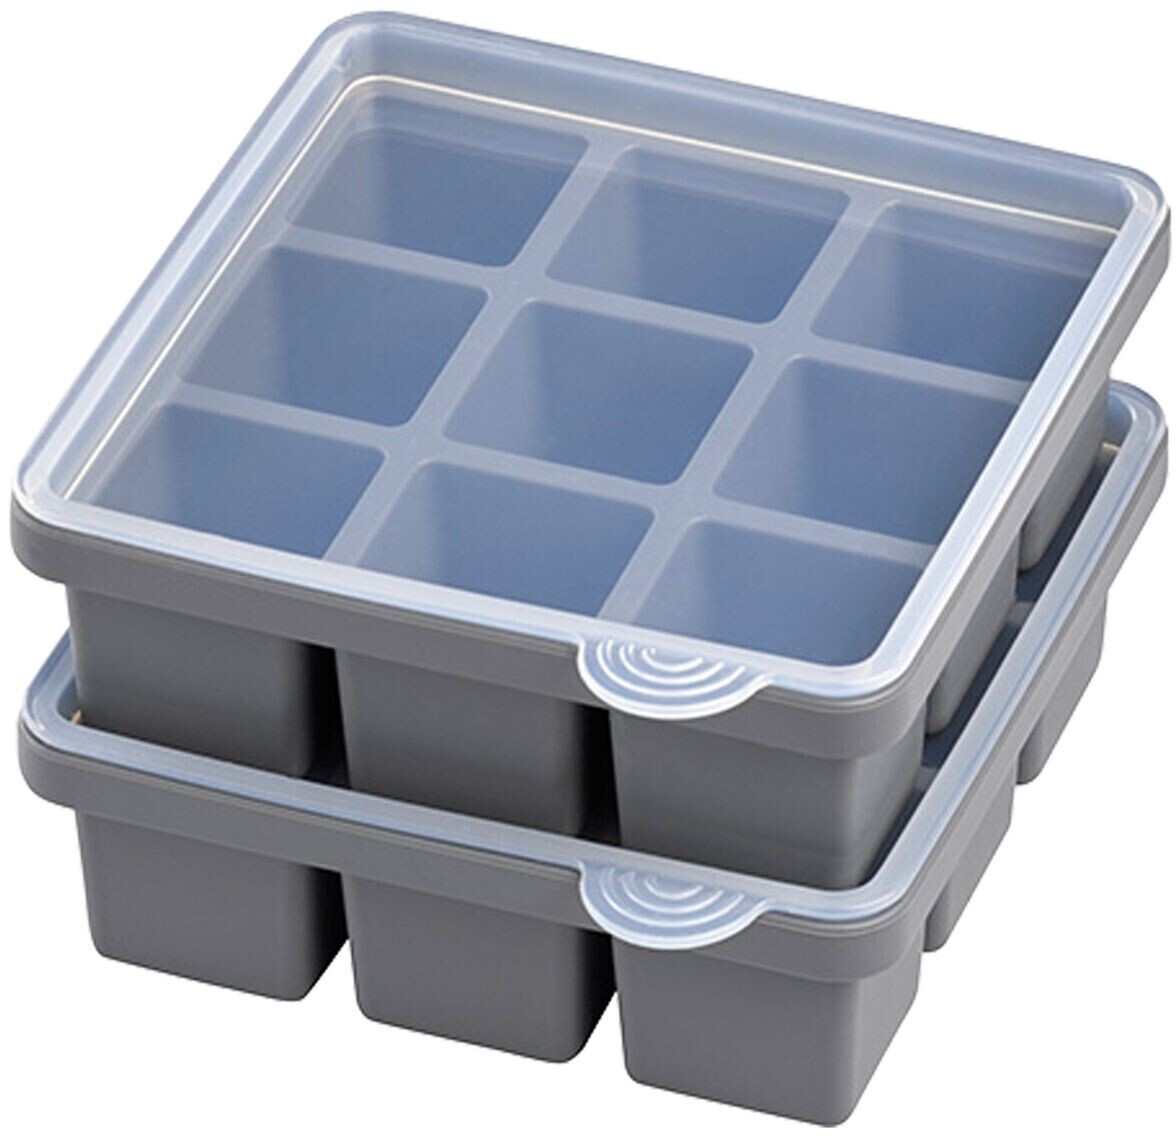 cubes, | lid, 11,17 cube 36102, base, 2 mold with Ice Preisvergleich APS 9 set, € bei pieces Germany ab flexible